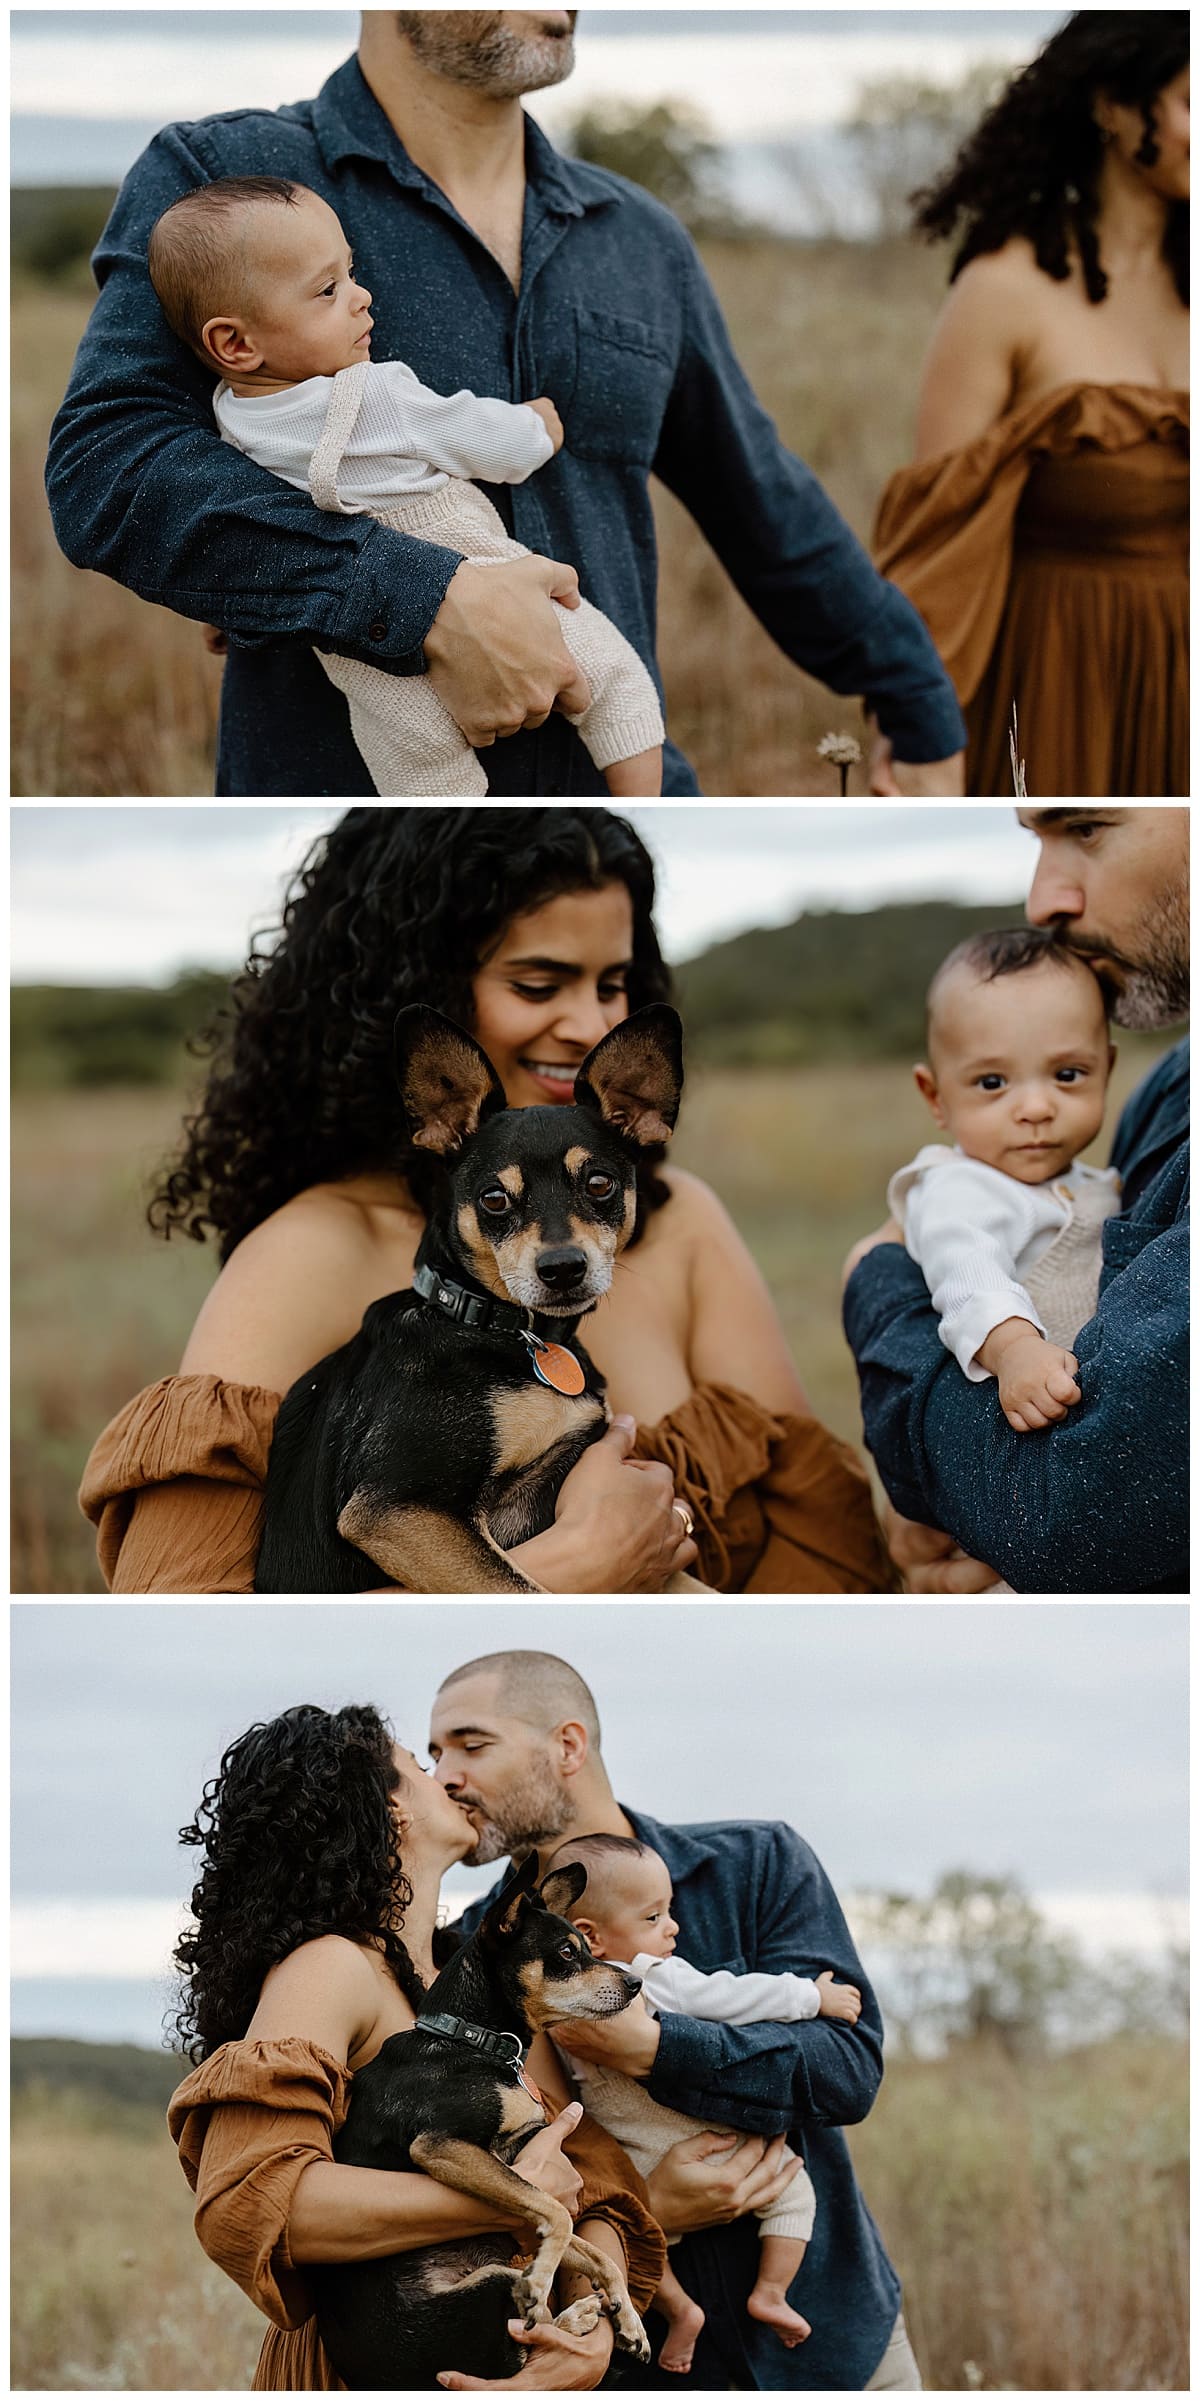 Parents stand close together holding their son and dog during their Lifestyle Family Photos 